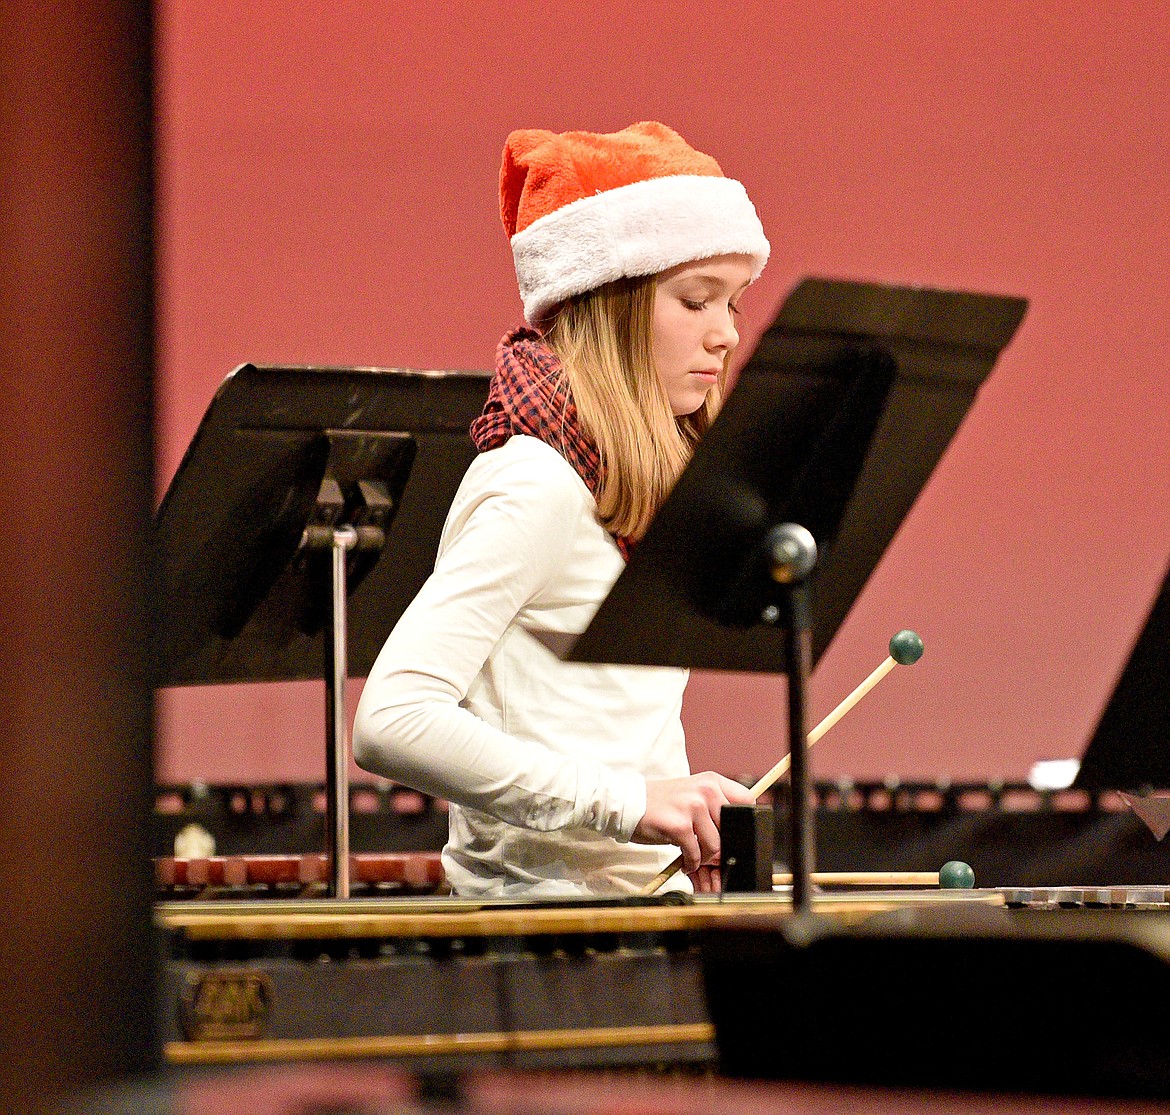 Sofia Christ performs at the Whitefish High School and Middle School Winter Concert at the Performing Arts Center on Dec. 13. (Whitney England/Whitefish Pilot)